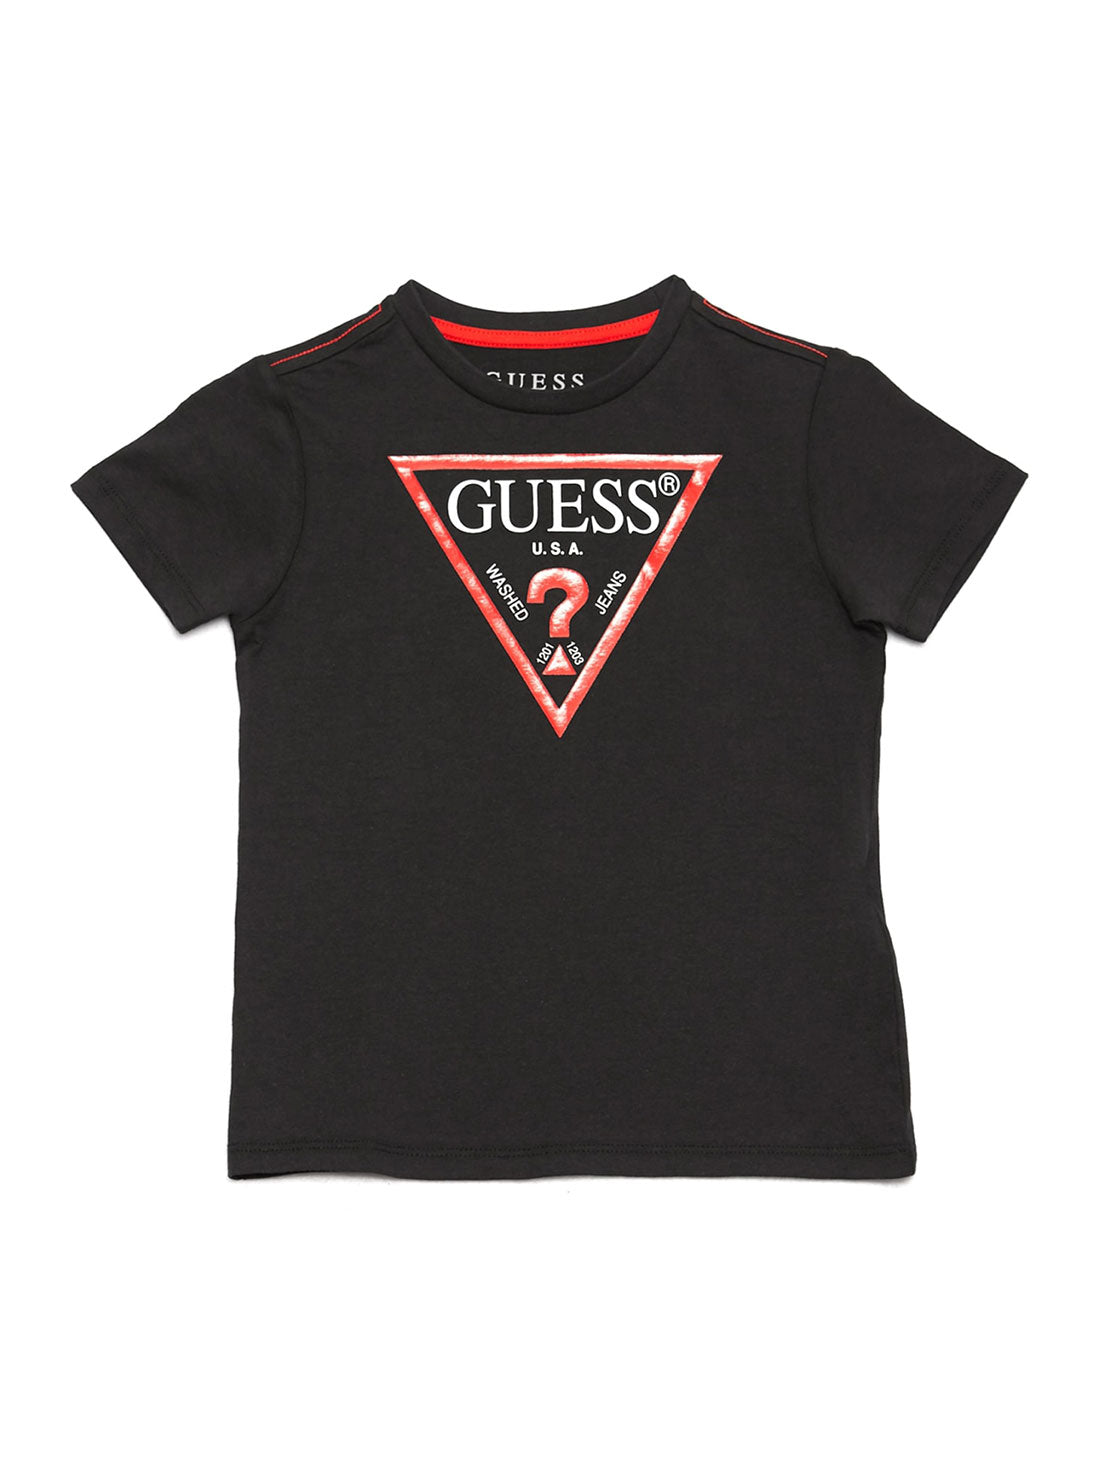 GUESS Little Boys Black Short Sleeve Triangle Logo Tee (2-7)  N73I55K5M20 Front View